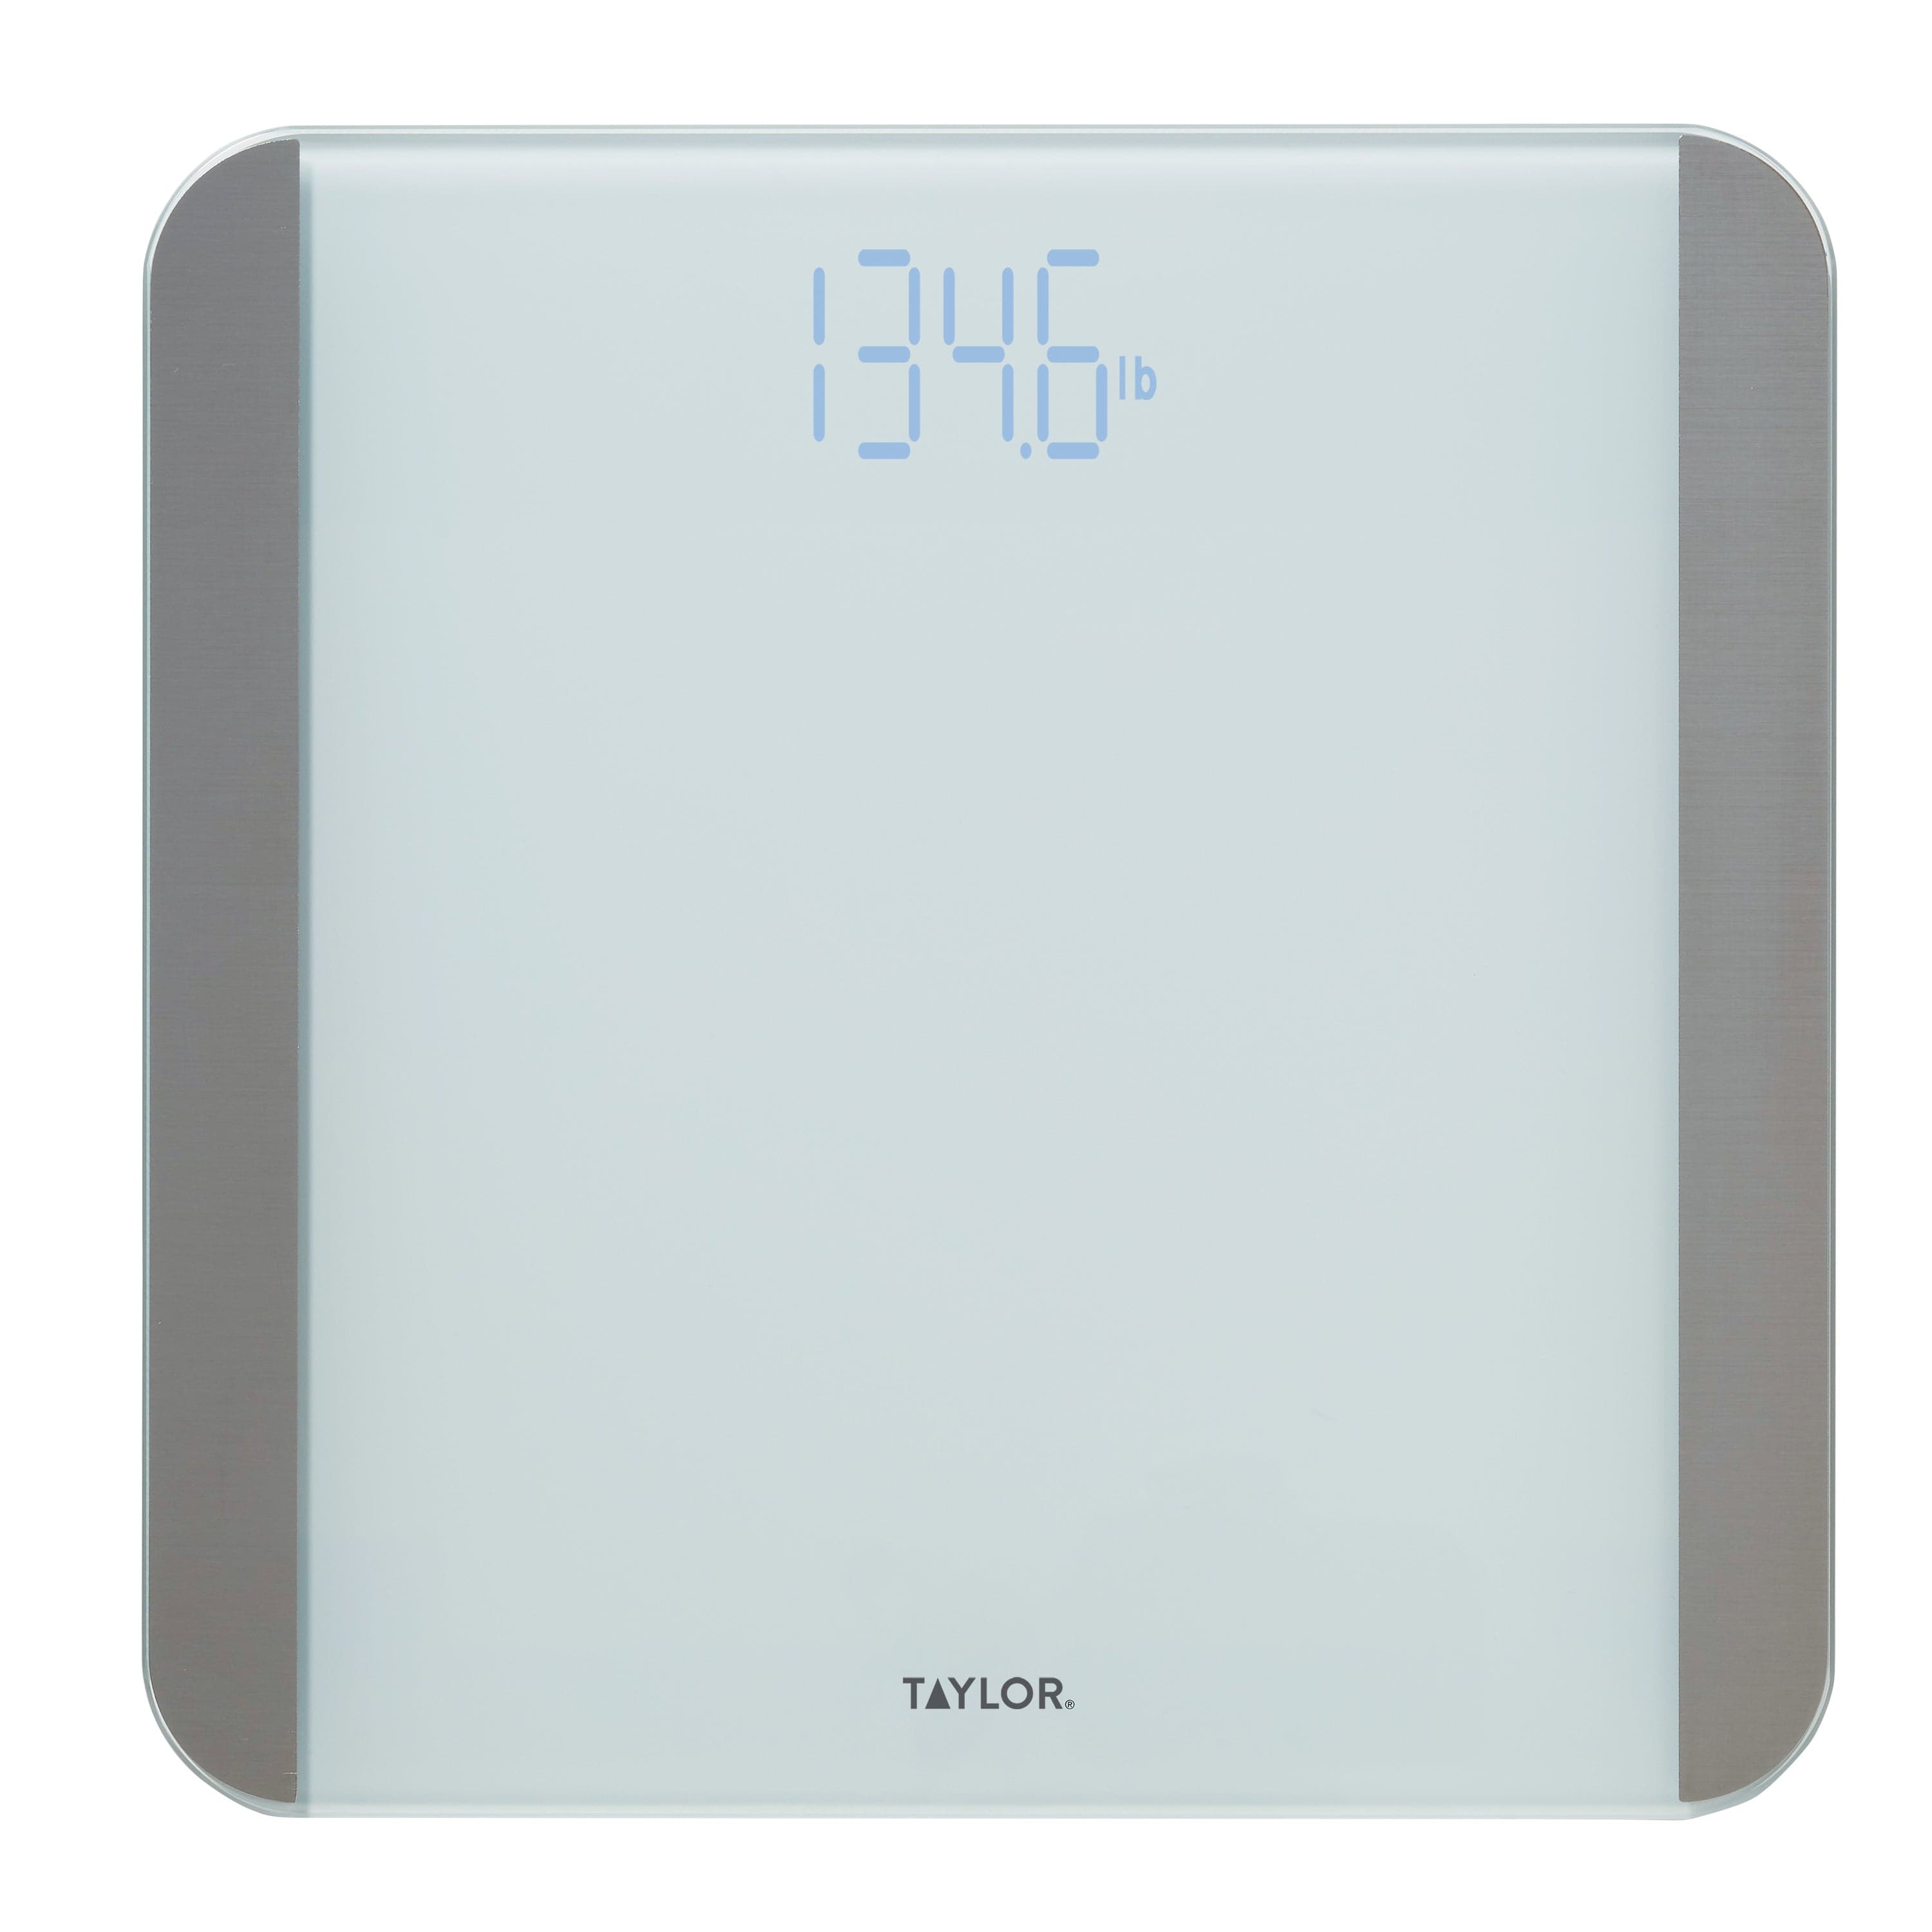 Large Number Bathroom Scale